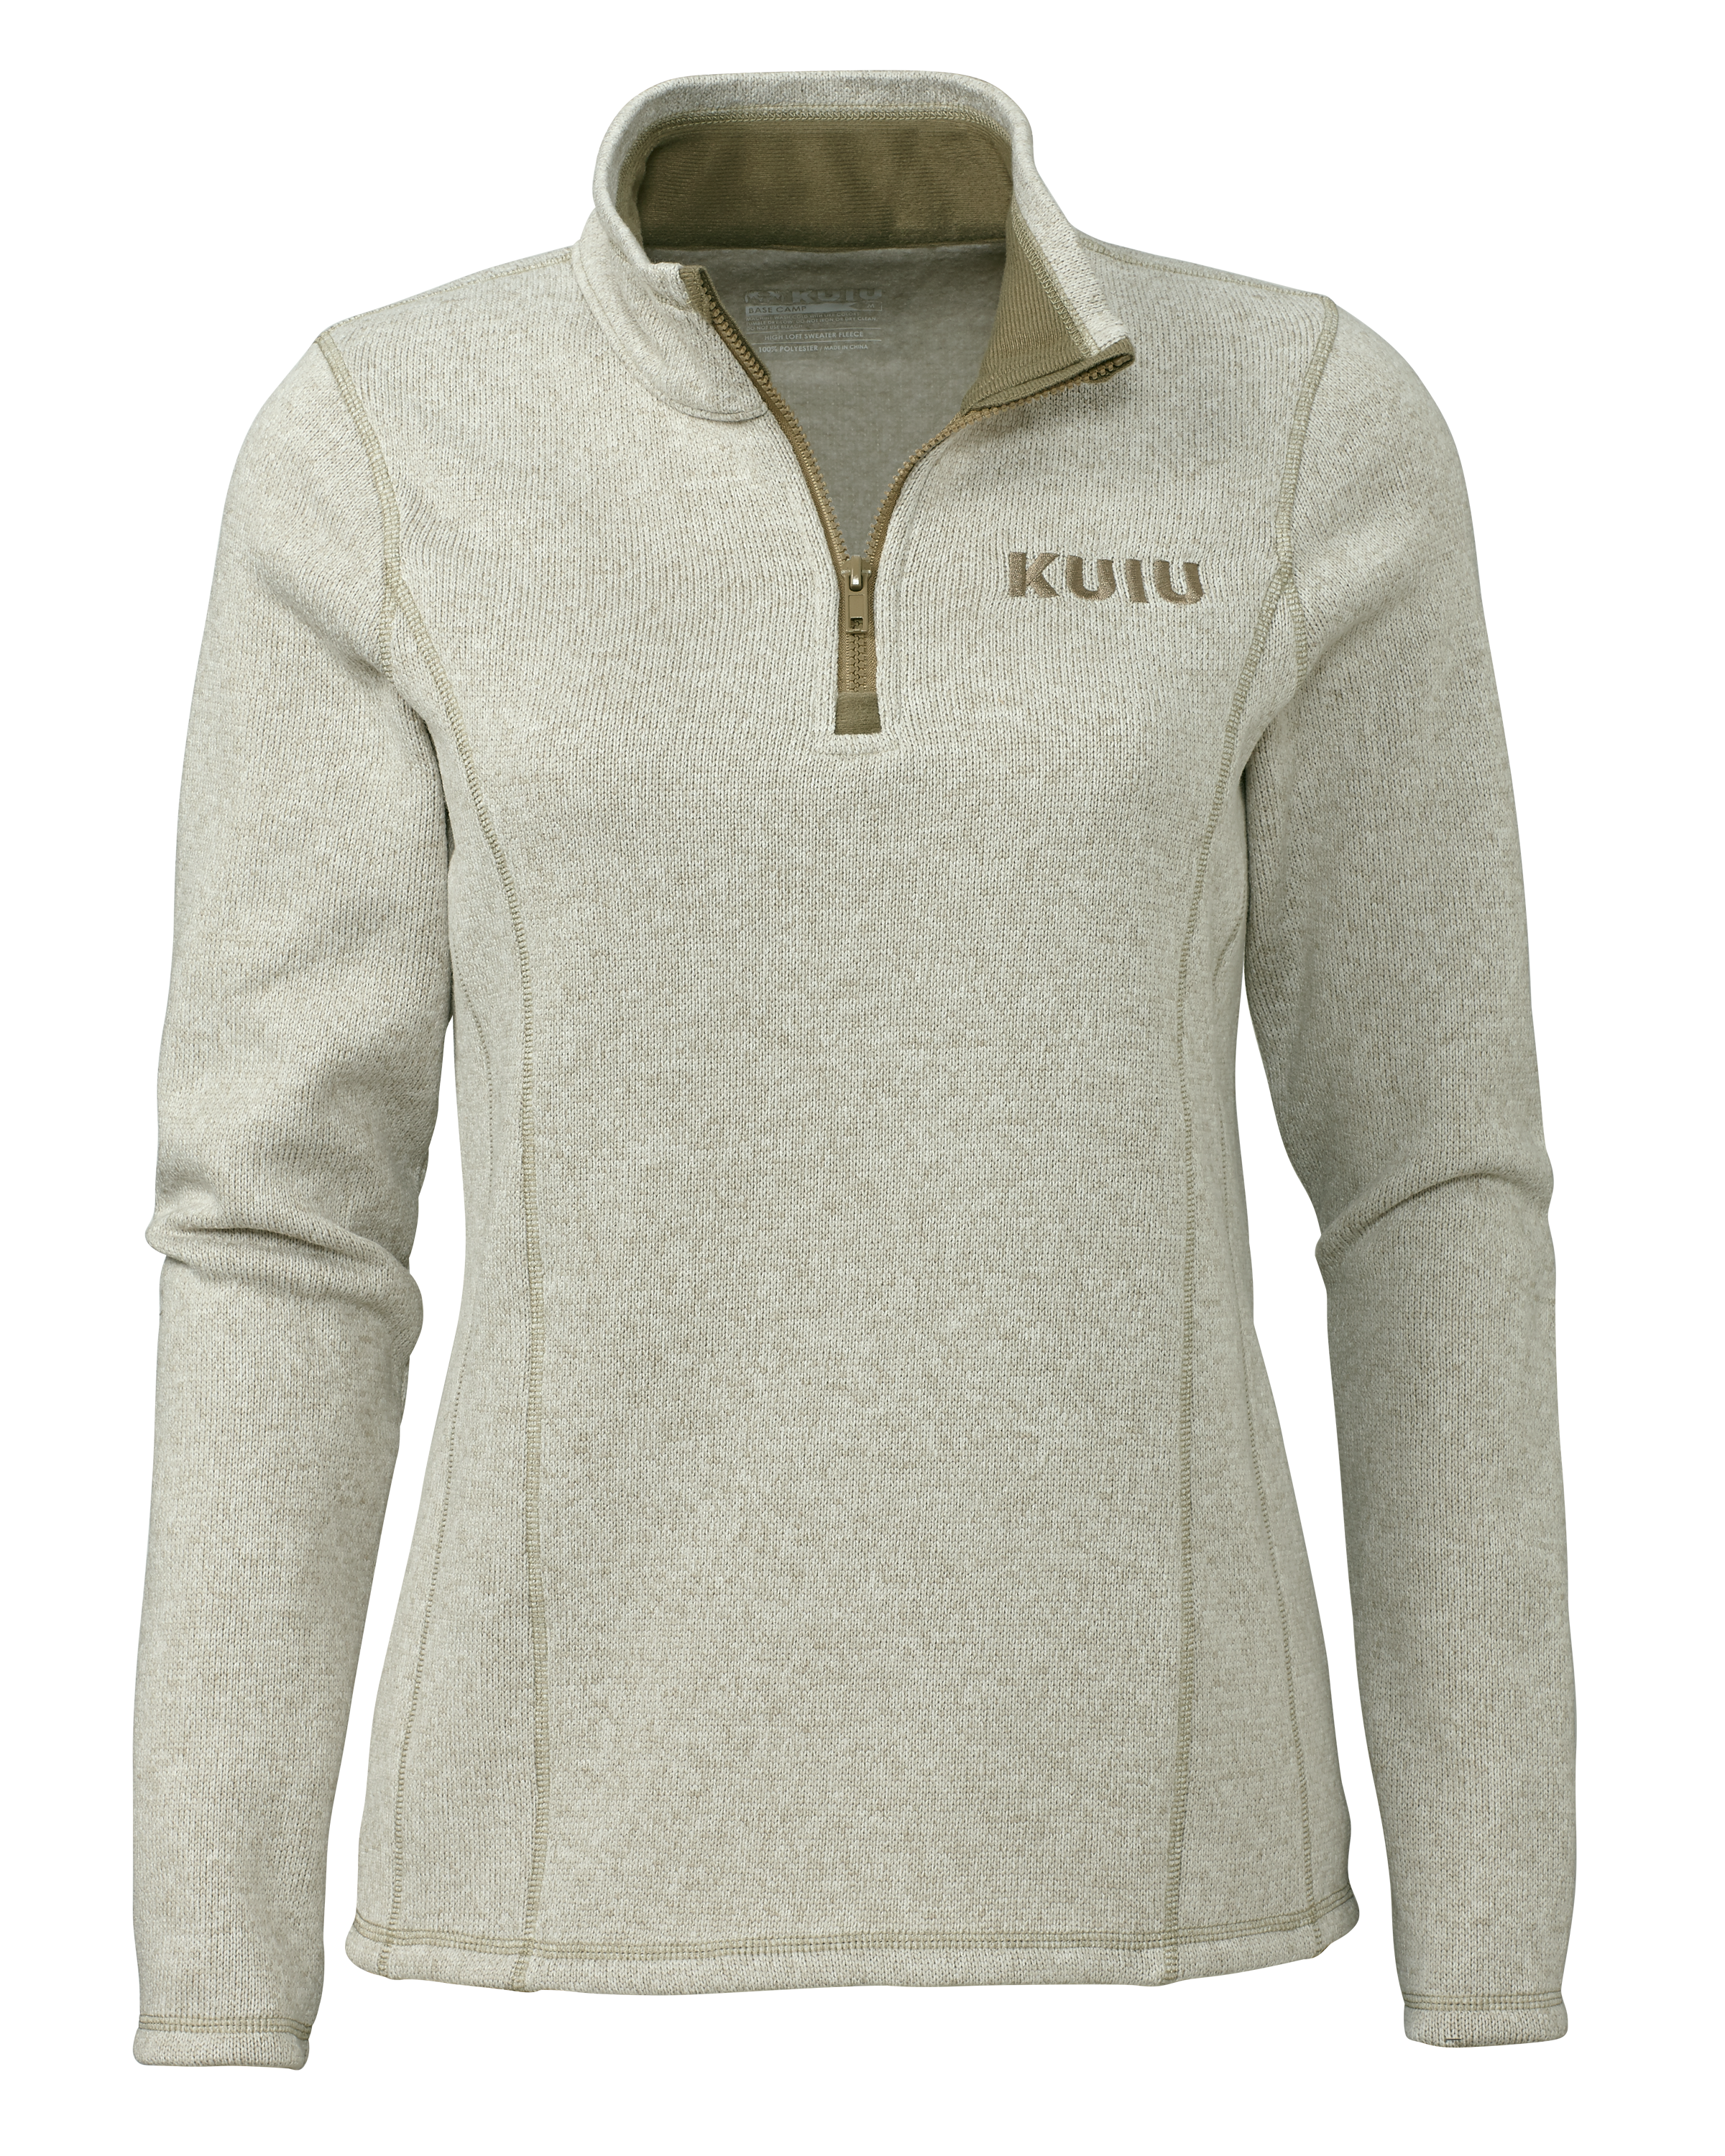 KUIU Outlet Women's Base Camp Pullover Sweater in Oatmeal | Large